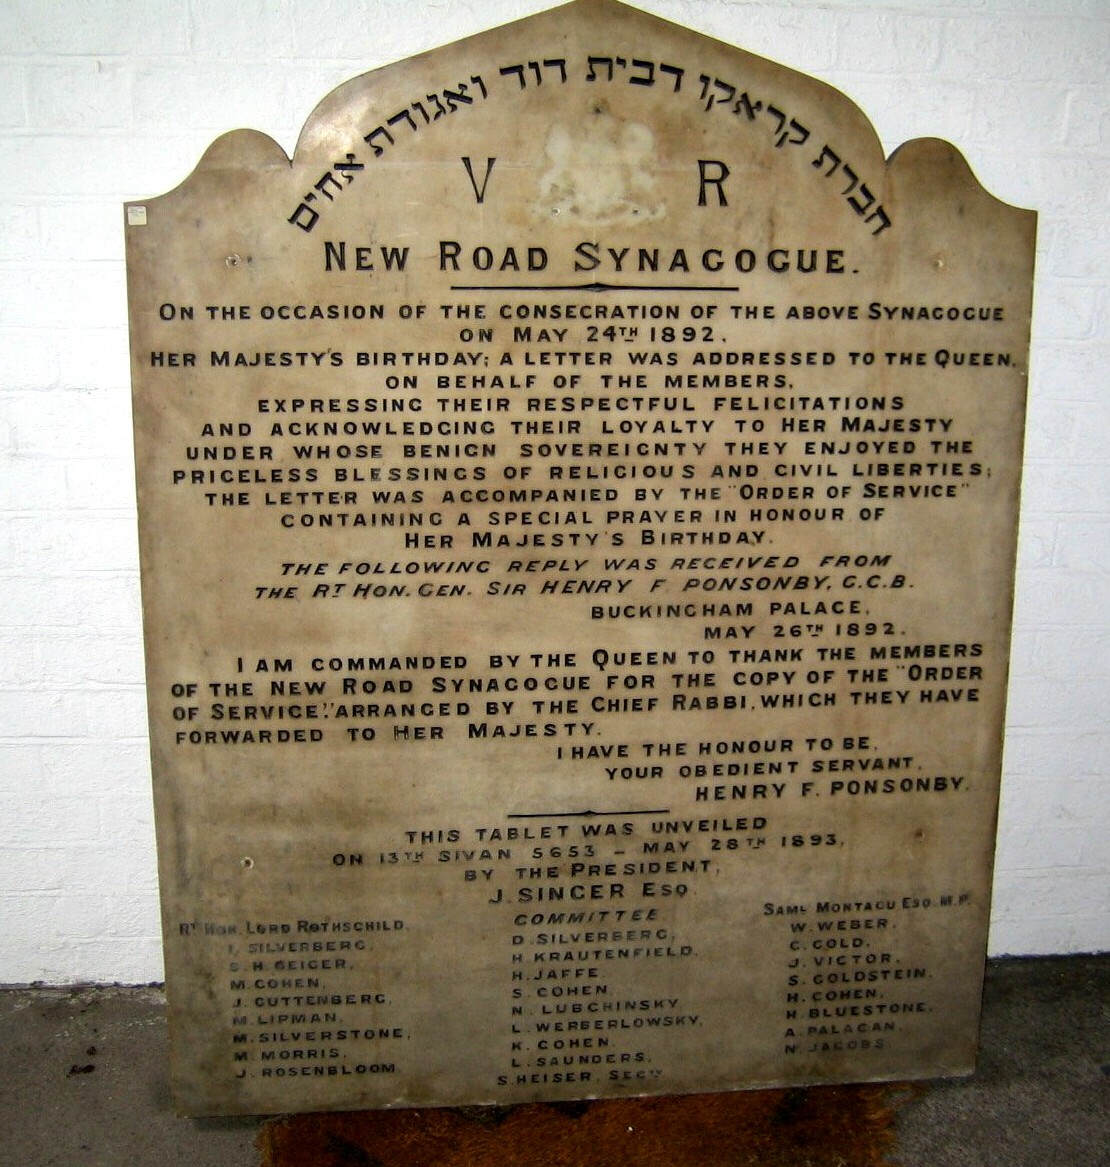 My understanding of the Hebrew around the top of this plaque is that New Road referred to themselves as the Sons of Krakov of the House of David - which presumably means their founders came from Krakov.